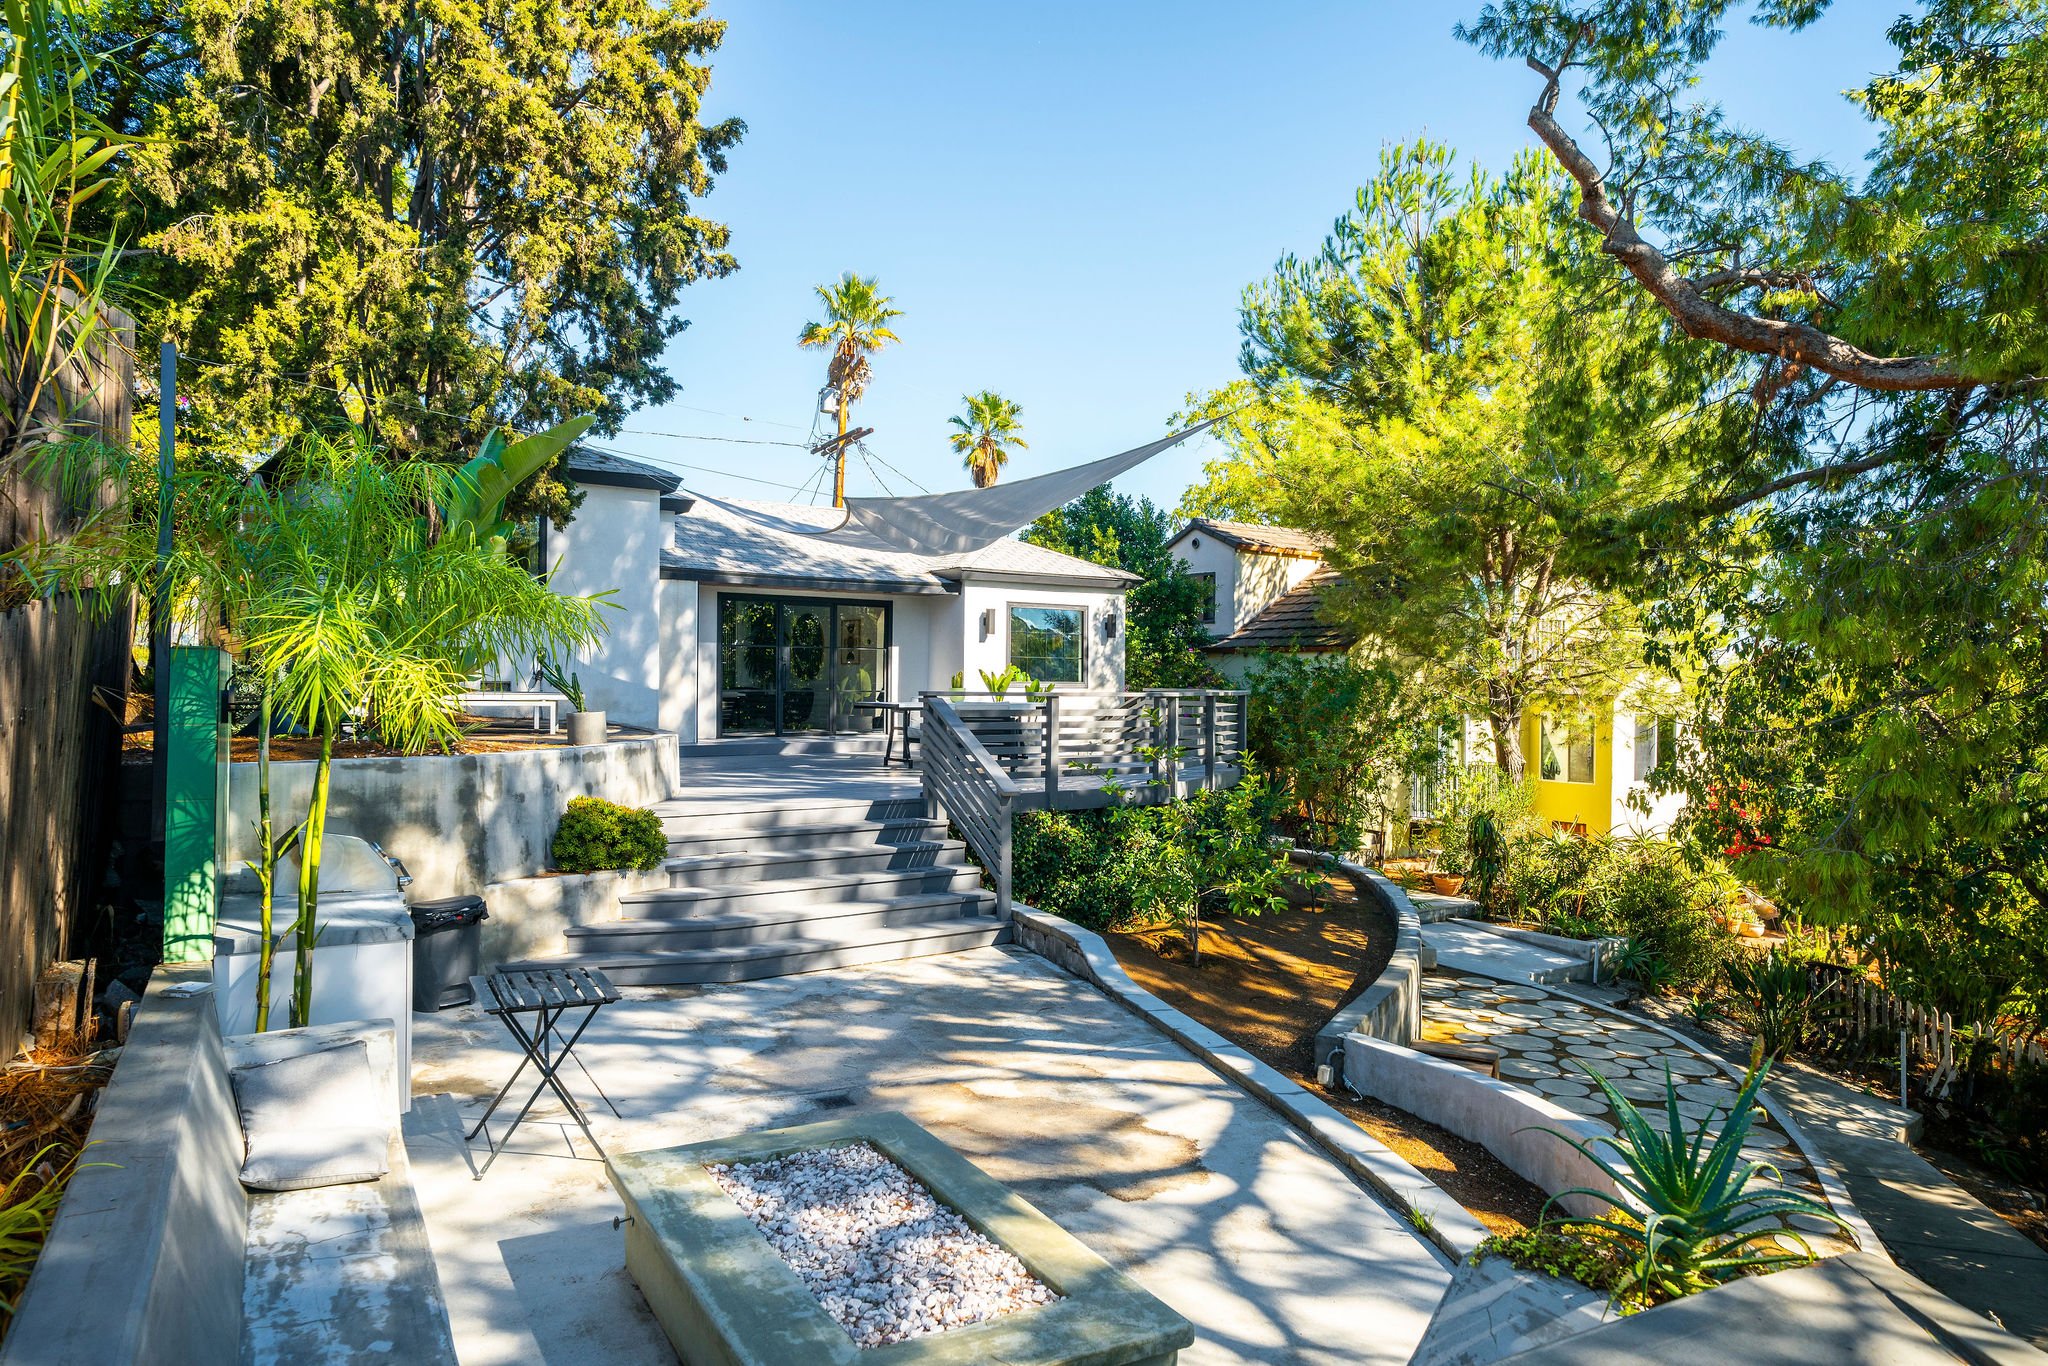 4050 York Hill Place, Eagle Rock Sold - $1,320,000